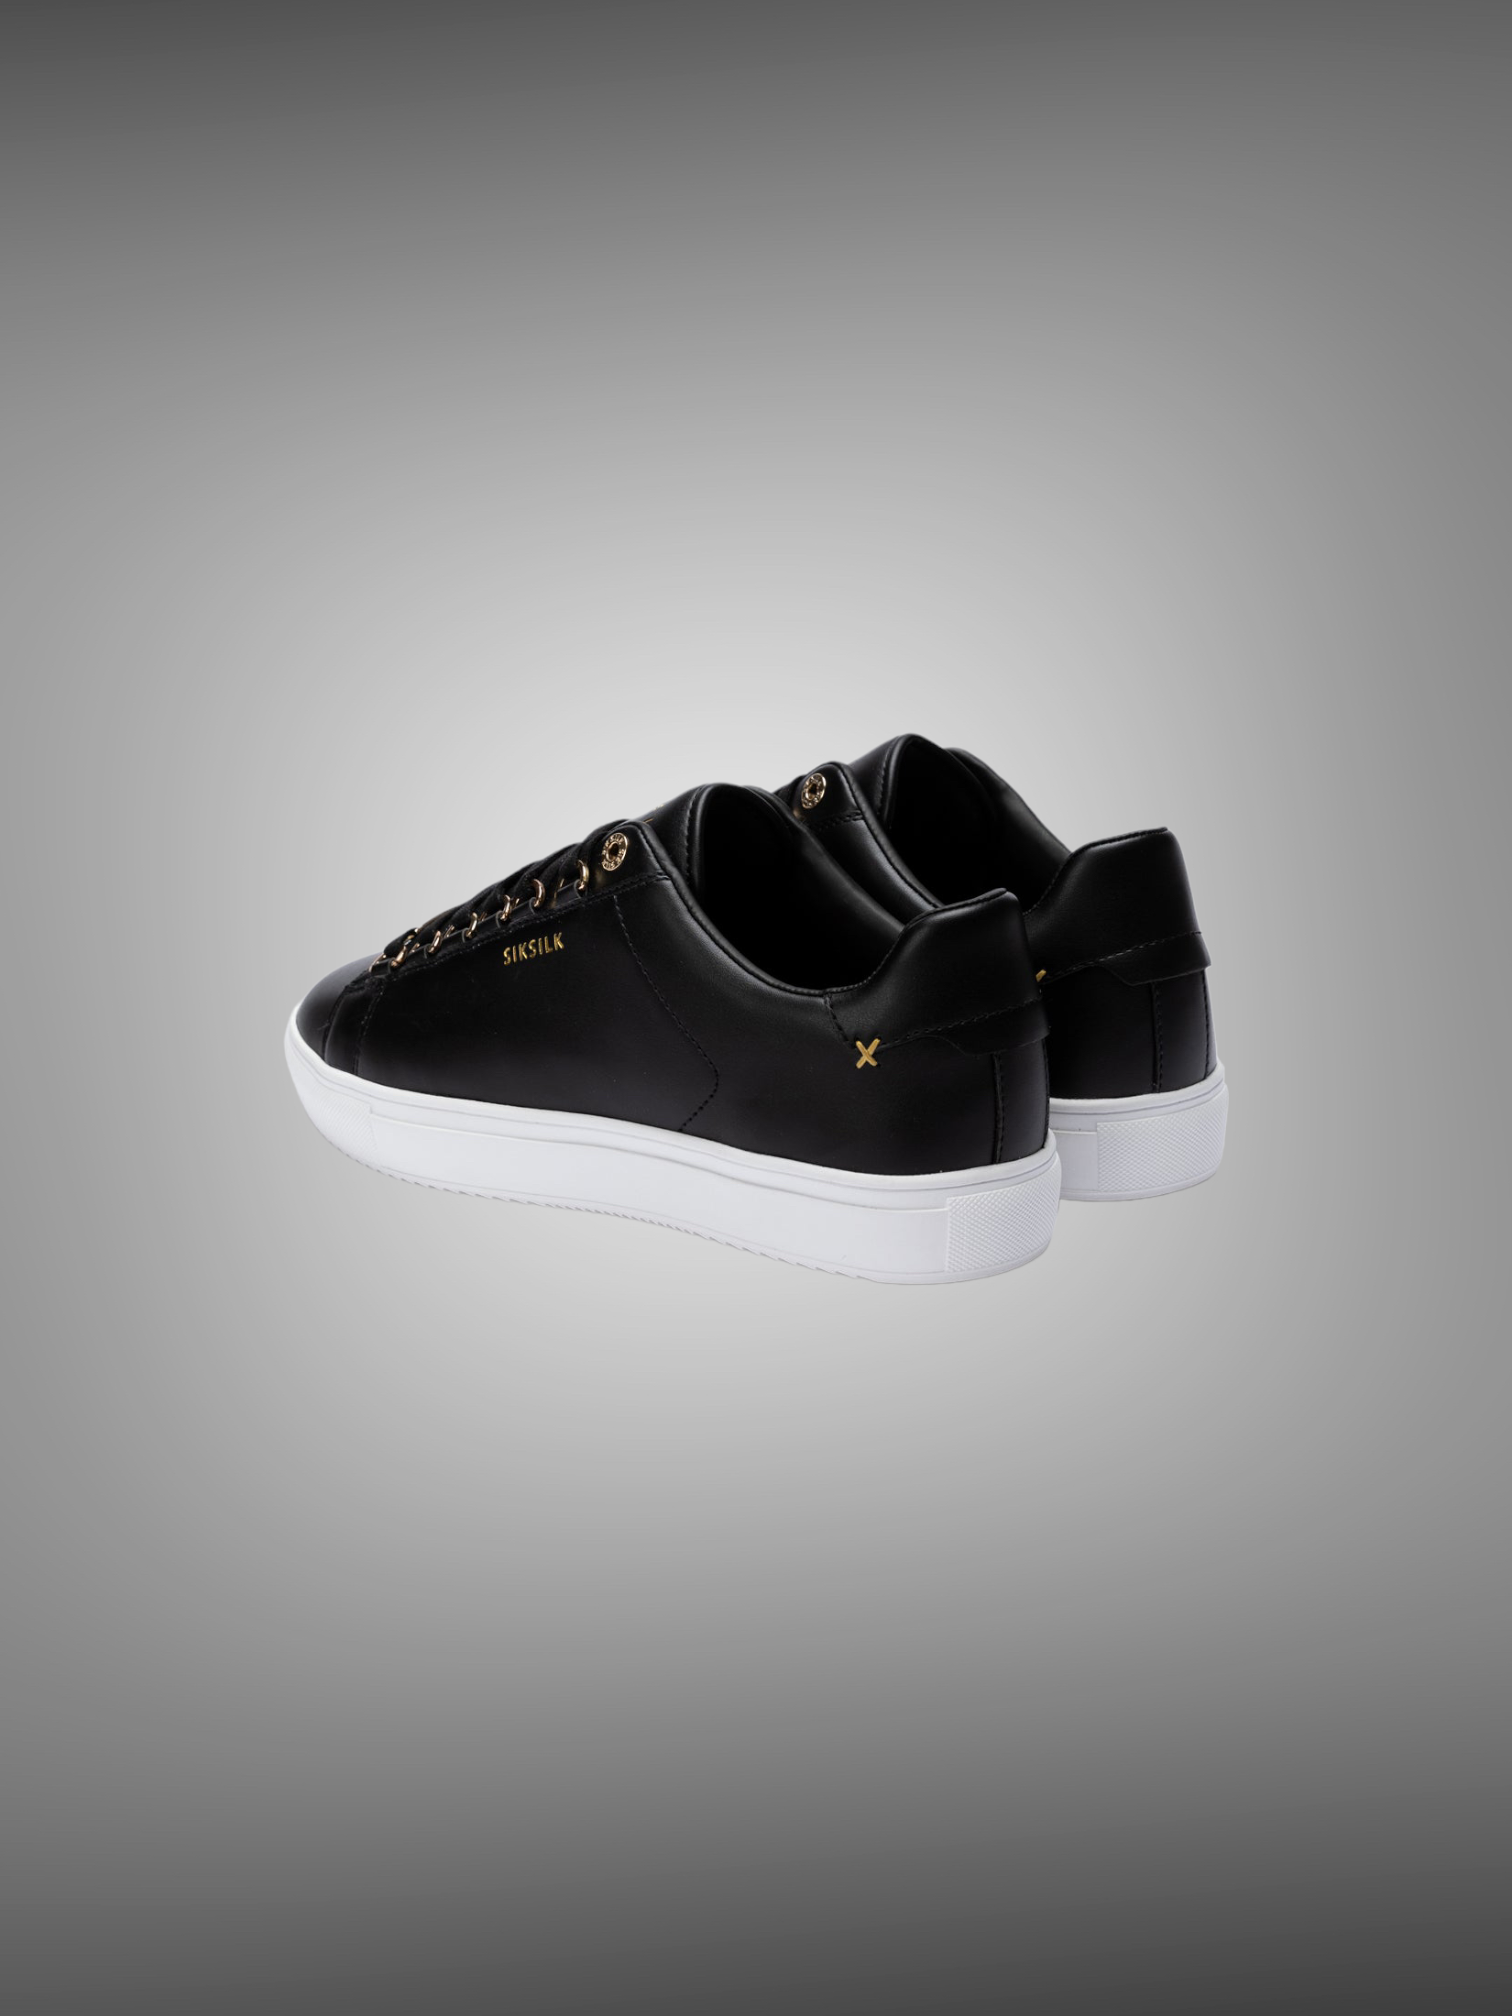 SikSilk - Black Classic Trainer With Metal D-Rings - Stayin